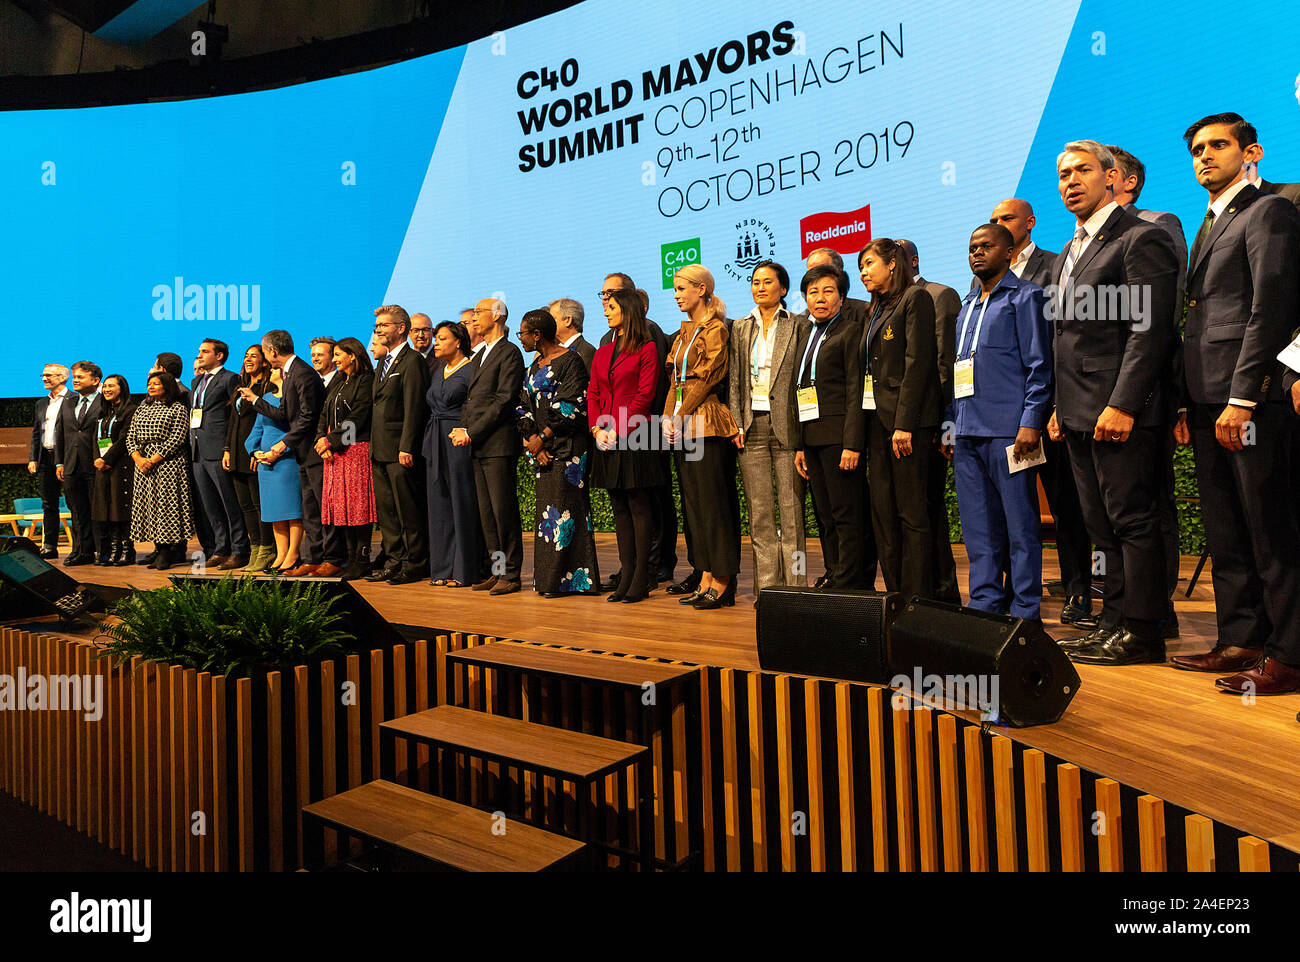 COPENHAGEN, DENMARK – OCTOBER 10. DENMARK: Mayors from the worlds megacities and who has jointed the C40 World Mayors declaration are lined-up for a family photo during the 2019 Summit in Copenhagen.. More than 90 mayors of some of the world’s largest and most influential cities representing some 700 million people meet in Copenhagen from October 9-12 for the C40 World Mayors Summit. The purpose with the Summit in Copenhagen is to build a global coalition of leading cities, businesses and citizens that rallies around radical and ambitious climate action. Also youth leaders from the recent Clim Stock Photo